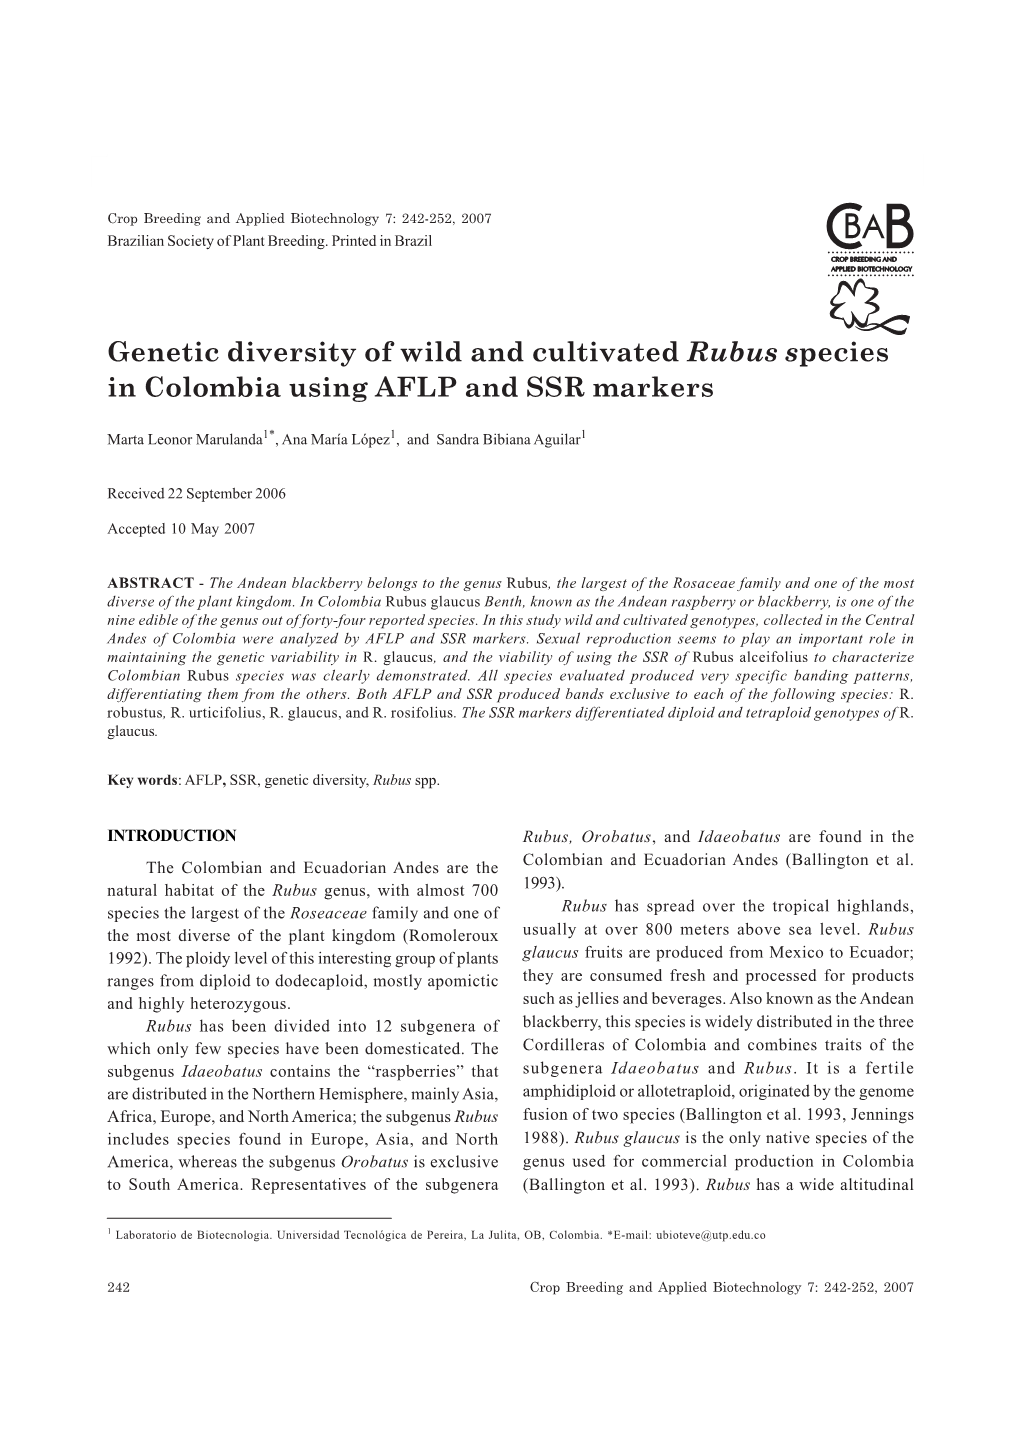 Genetic Diversity of Wild and Cultivated Rubus Species in Colombia Using AFLP and SSR Markers